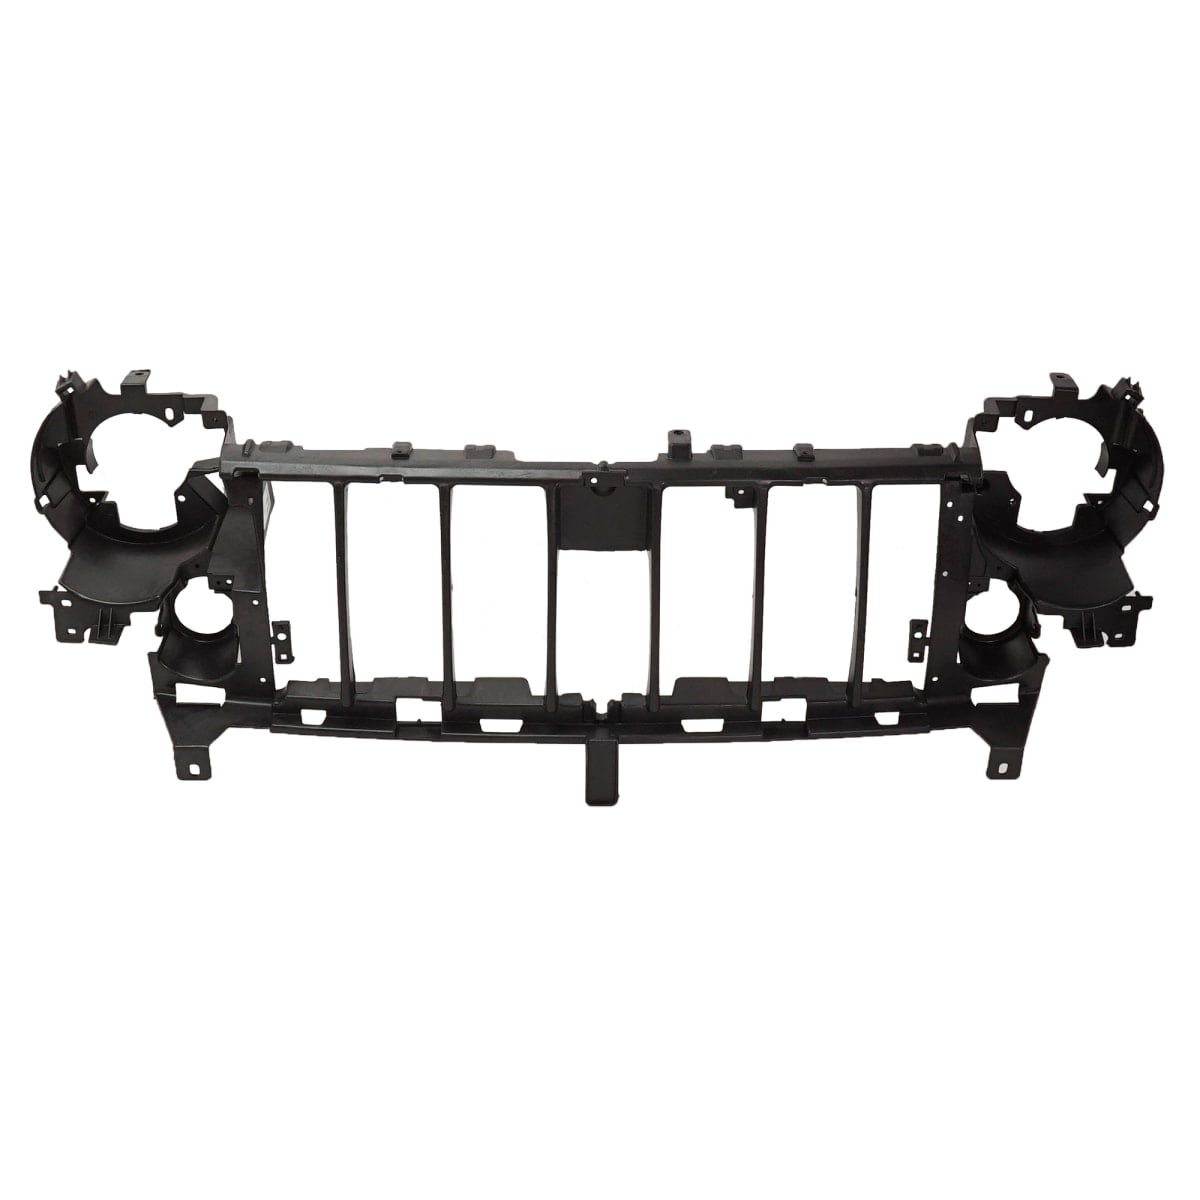 Grille Opening Panel Reinforcement FO1220240 Plastic FO1221135 For Ford Excursion Header Panel 2005 6C3Z8A284A